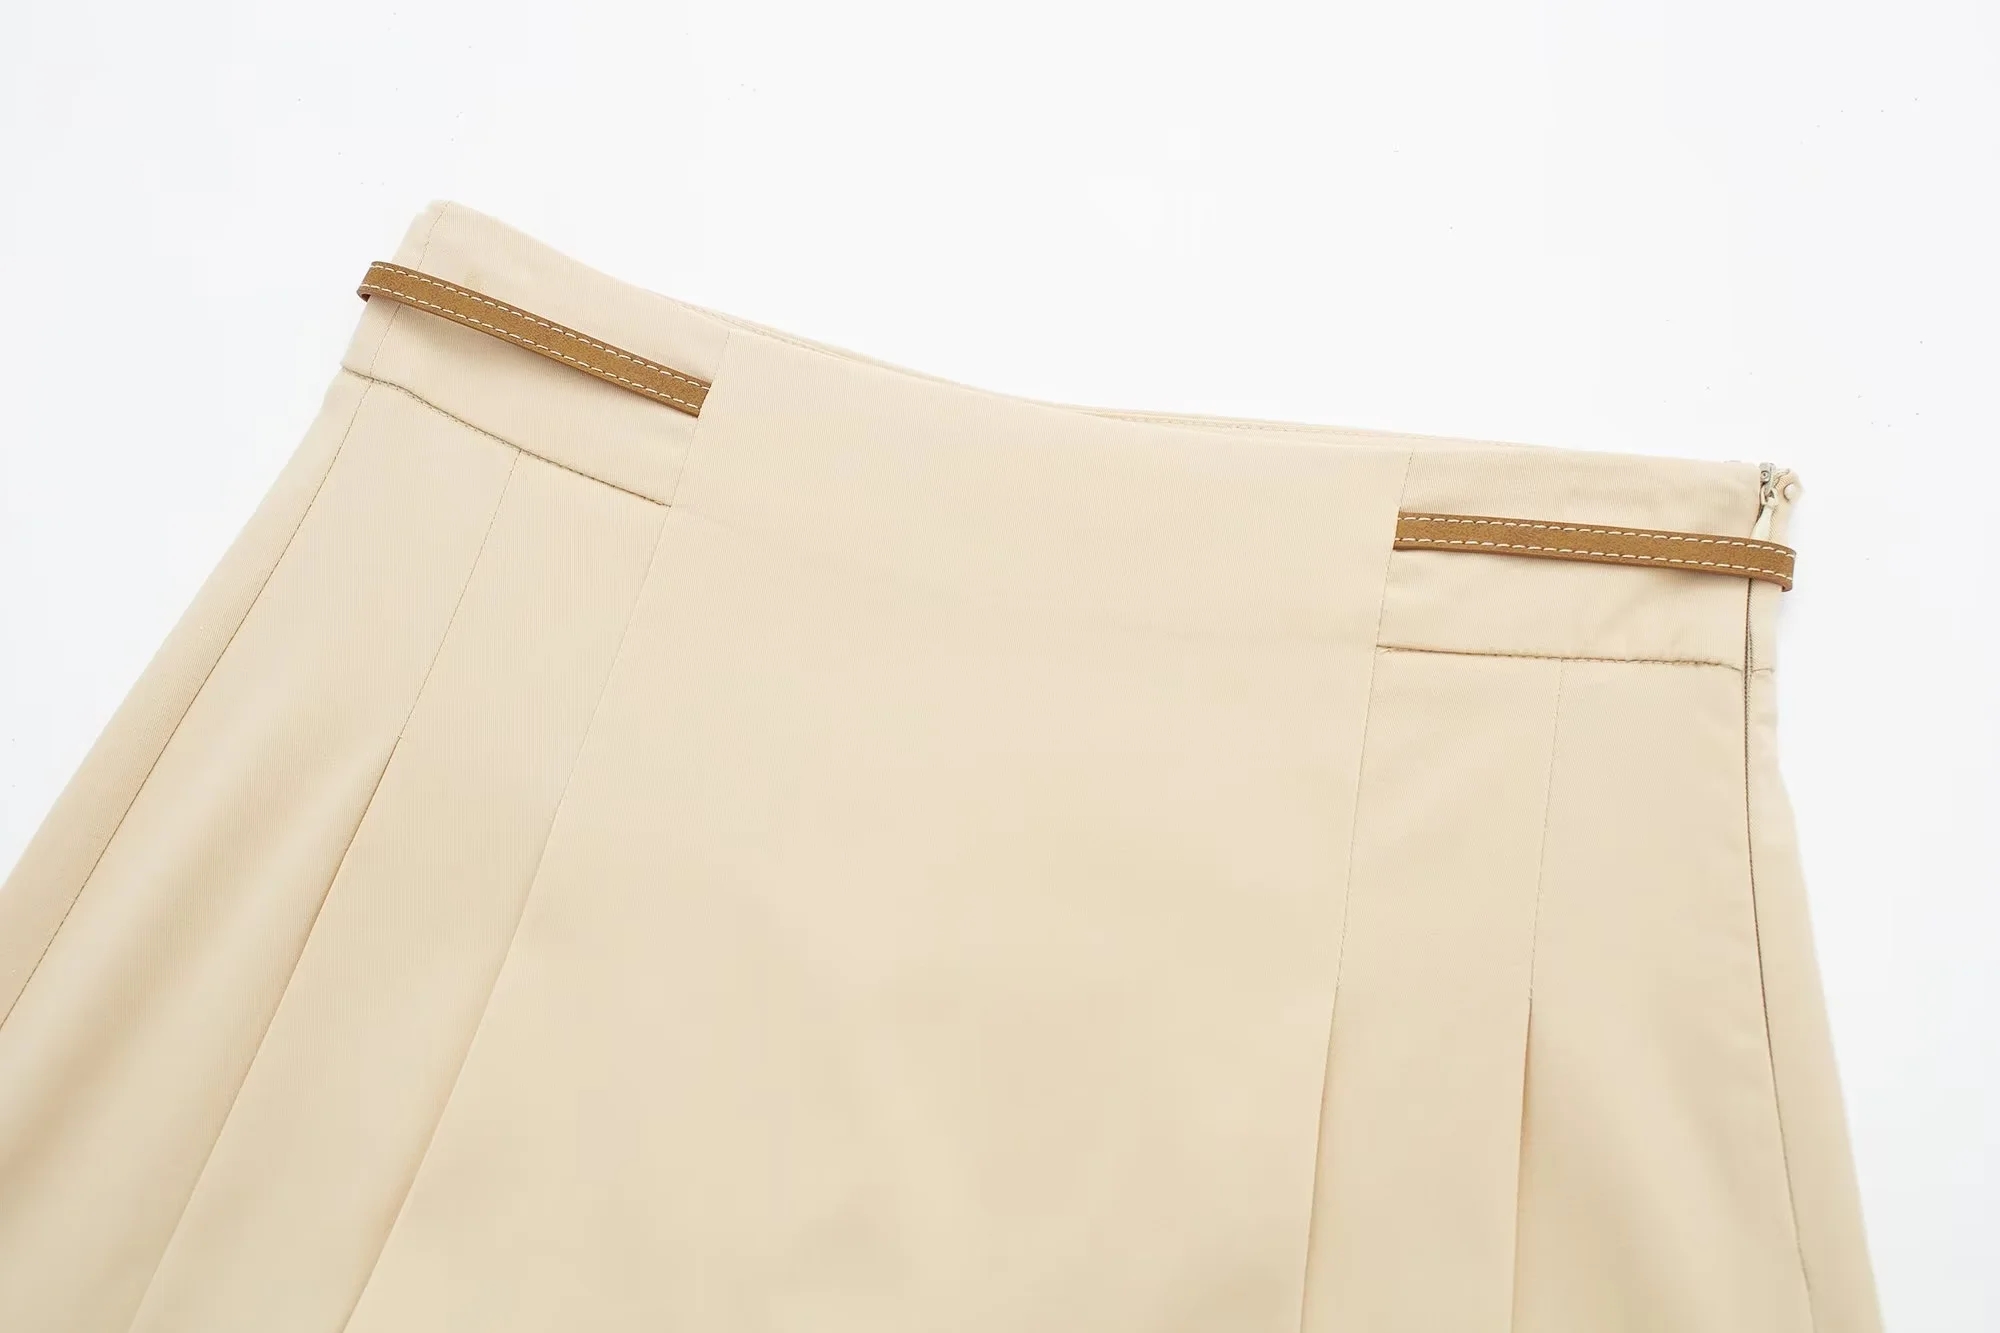 Fashion Cream Color Blended Wide Pleated Culottes,Shorts